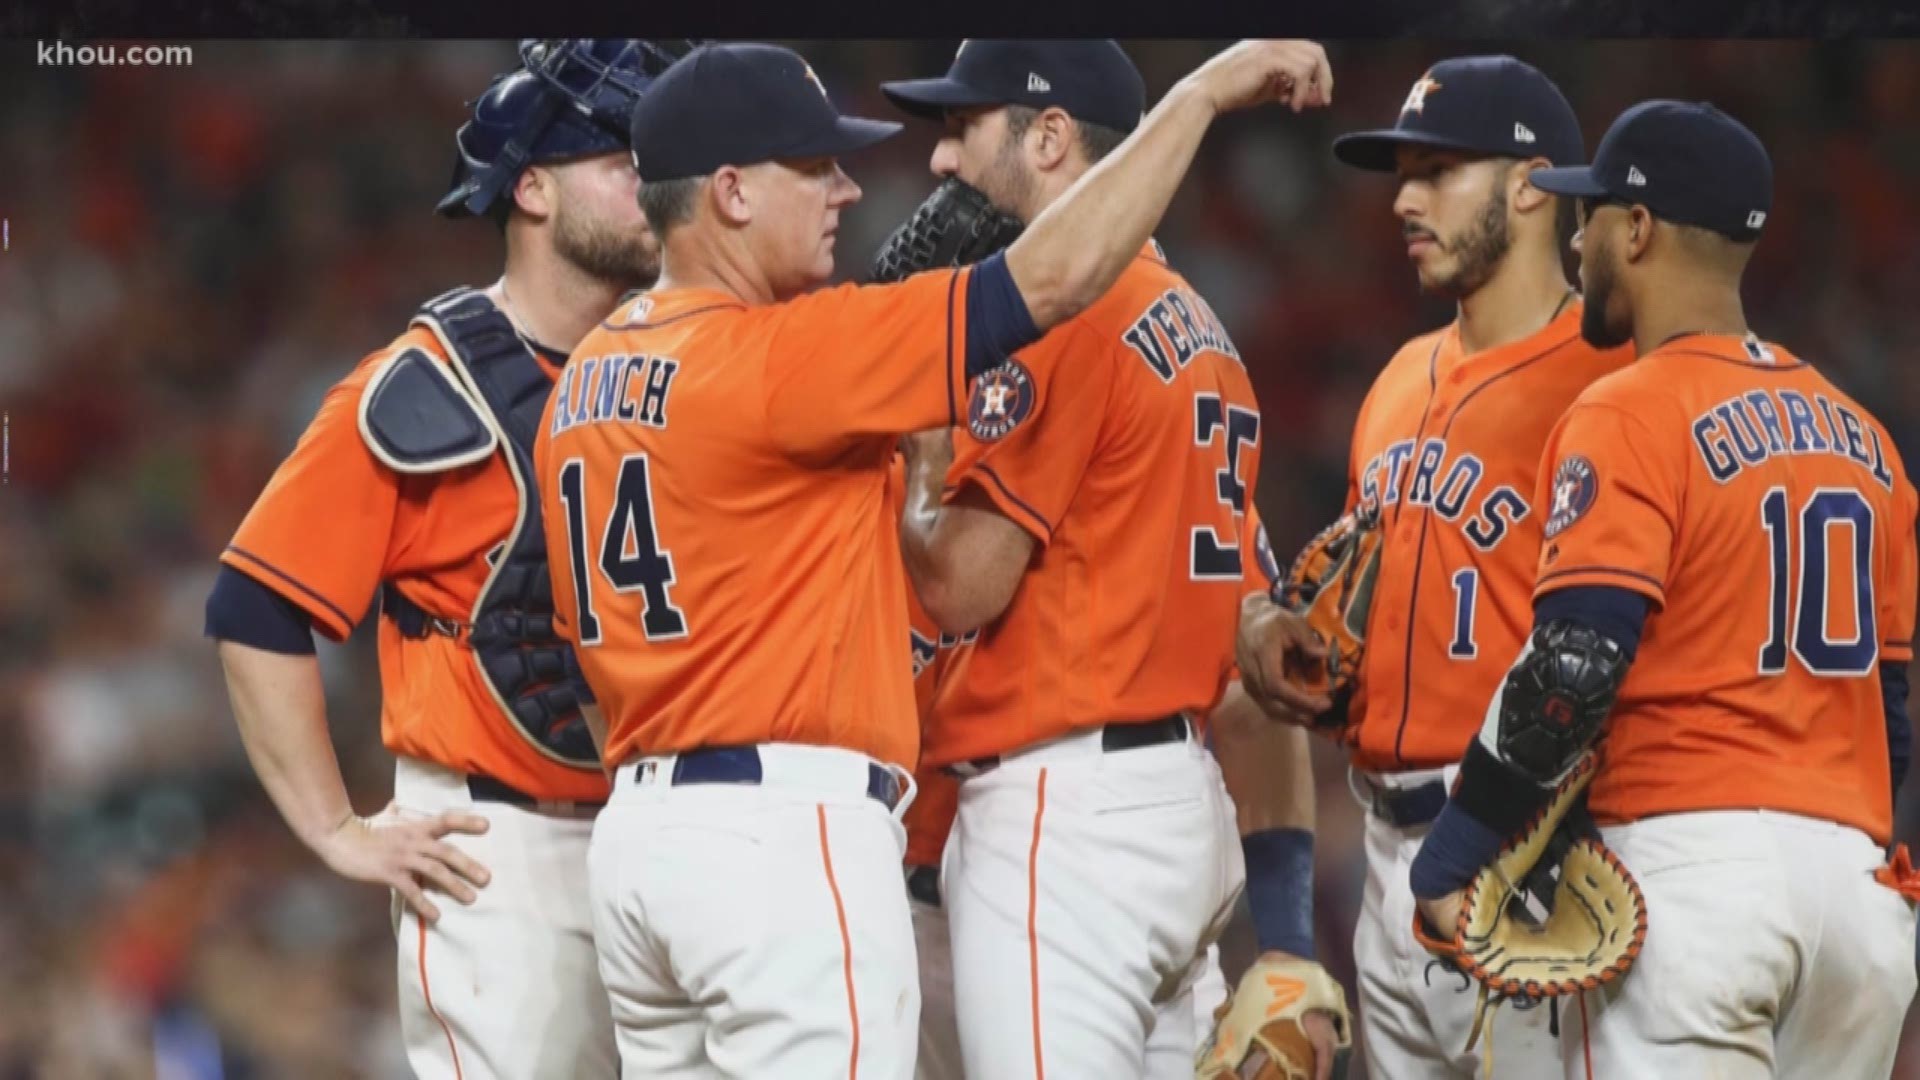 The Houston Astros face the Boston Red Sox in Game 1 of the ALCS Saturday night. Here are three of the hot topics to keep in mind before the series.